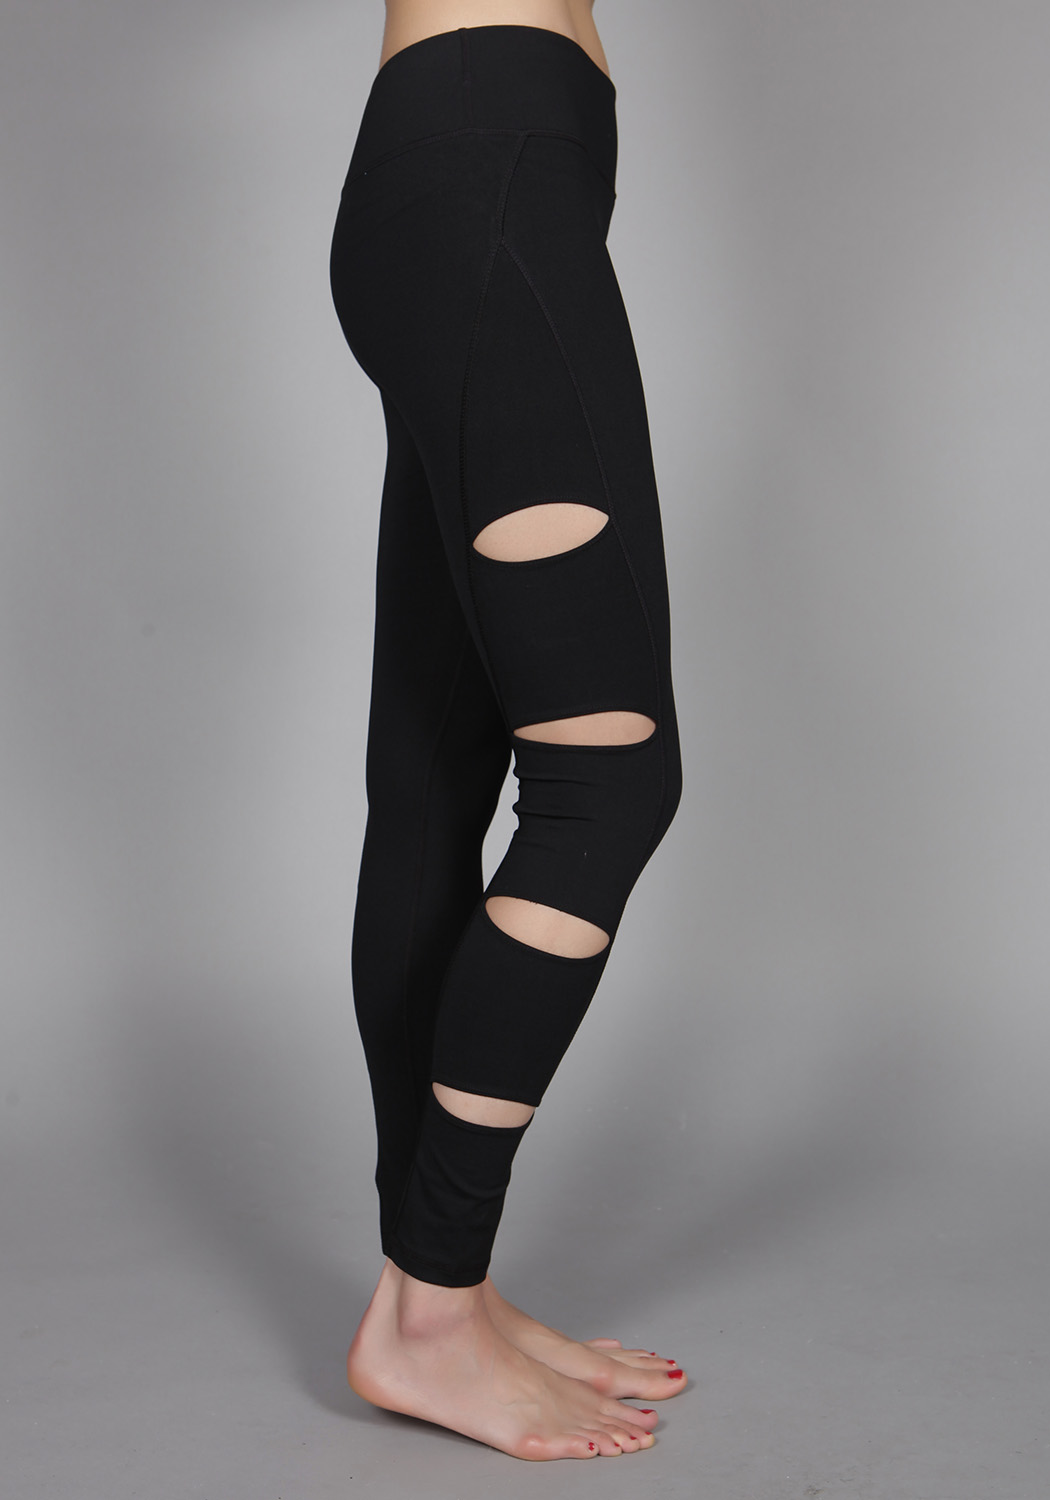 Cut Out Black Long Leggings - The One with Holes